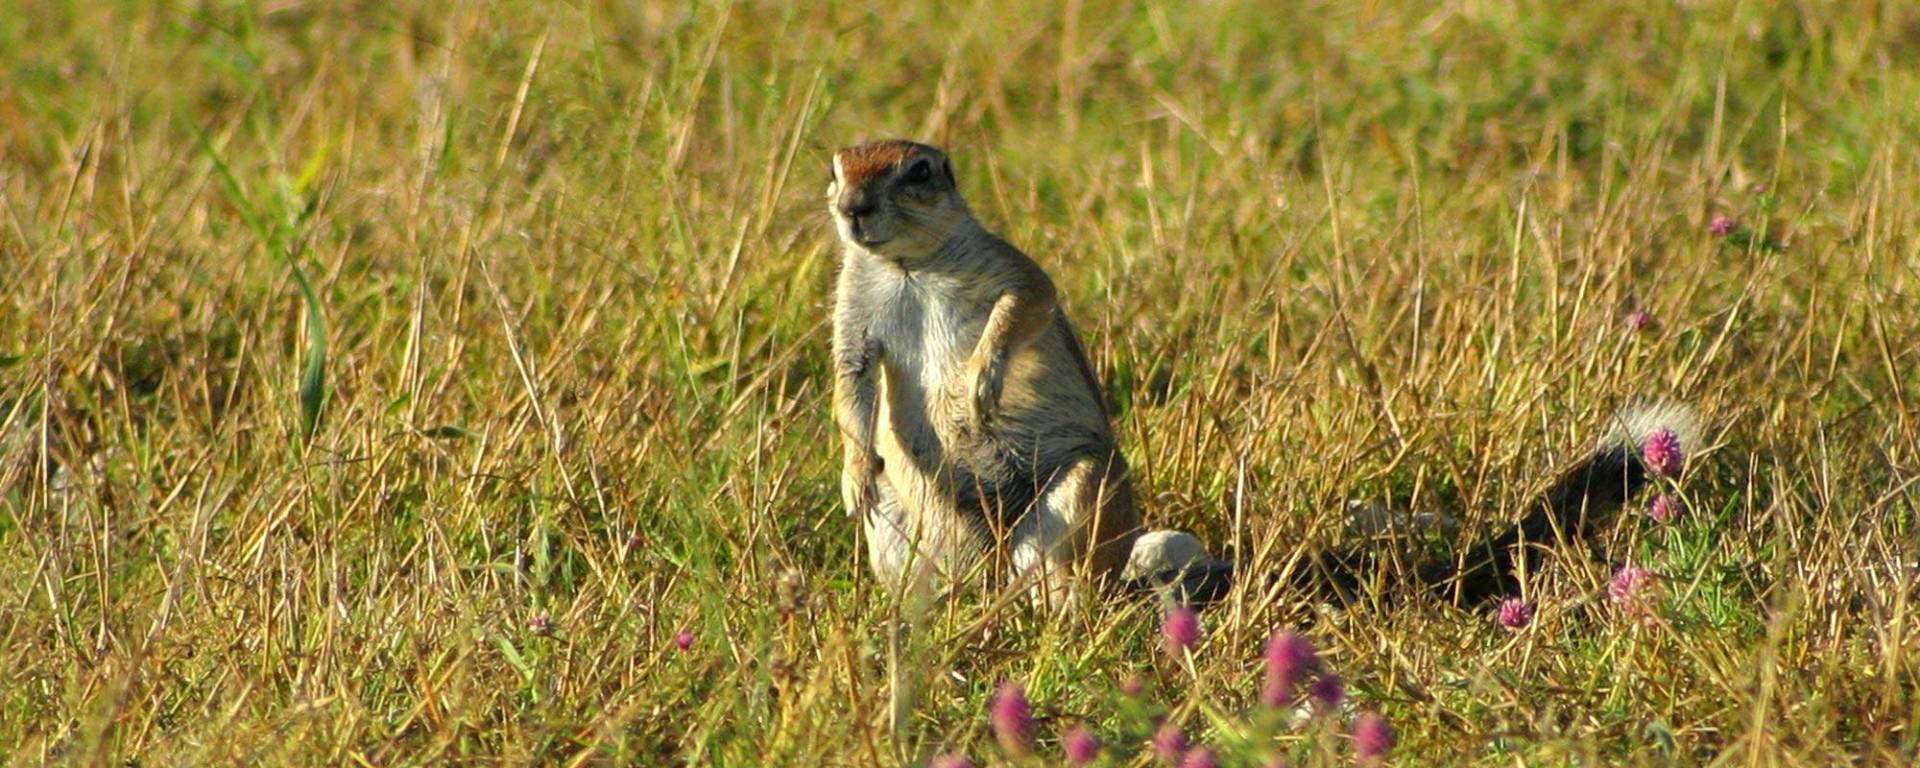 Well-fed ground squirrel in Namibian Fall